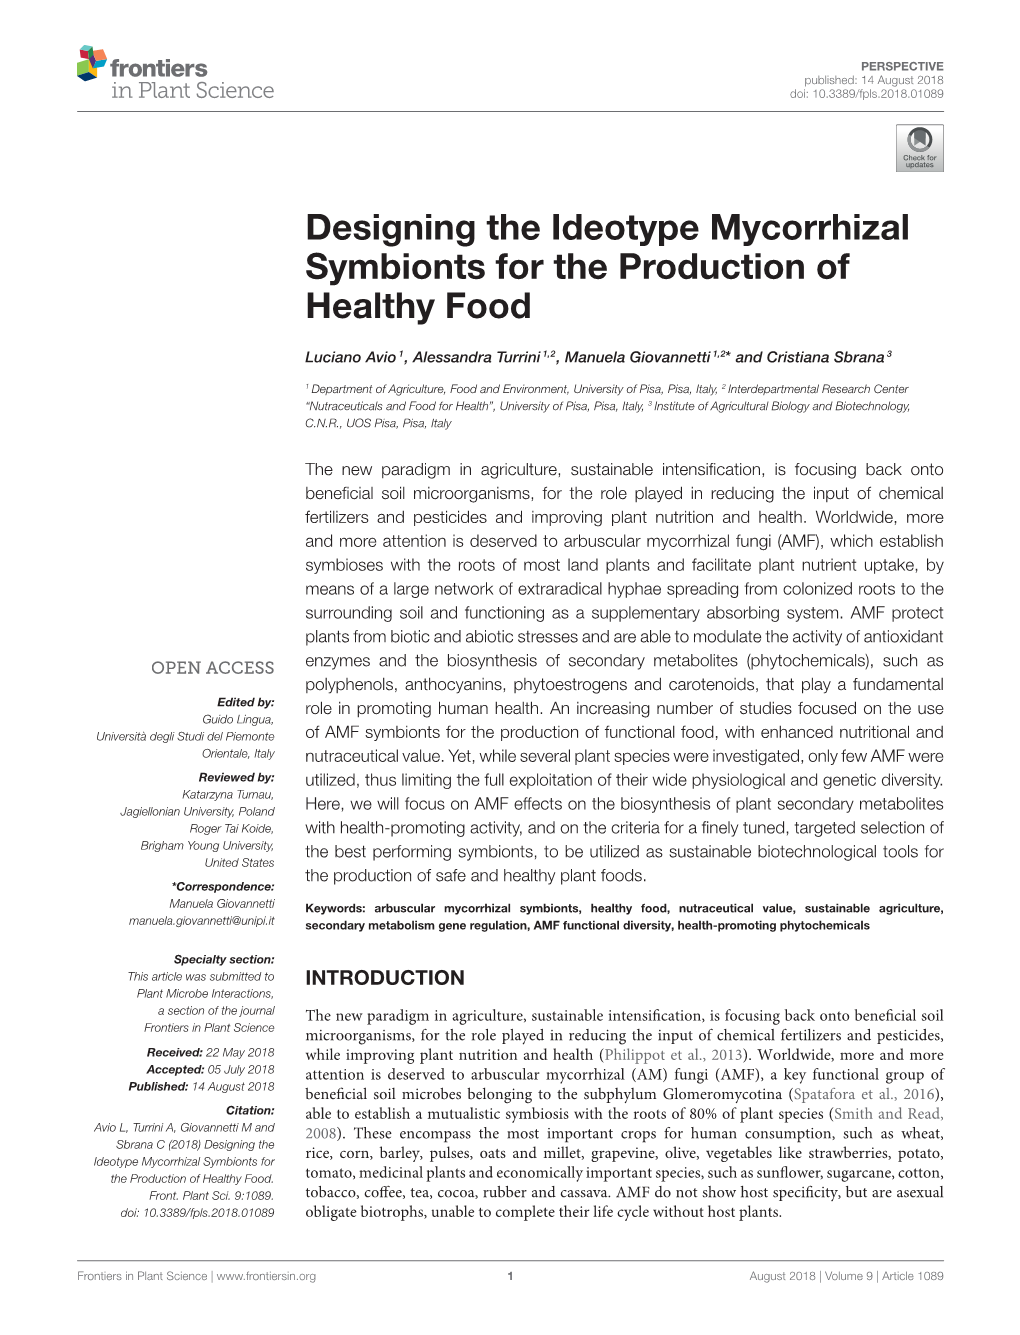 Designing the Ideotype Mycorrhizal Symbionts for the Production of Healthy Food